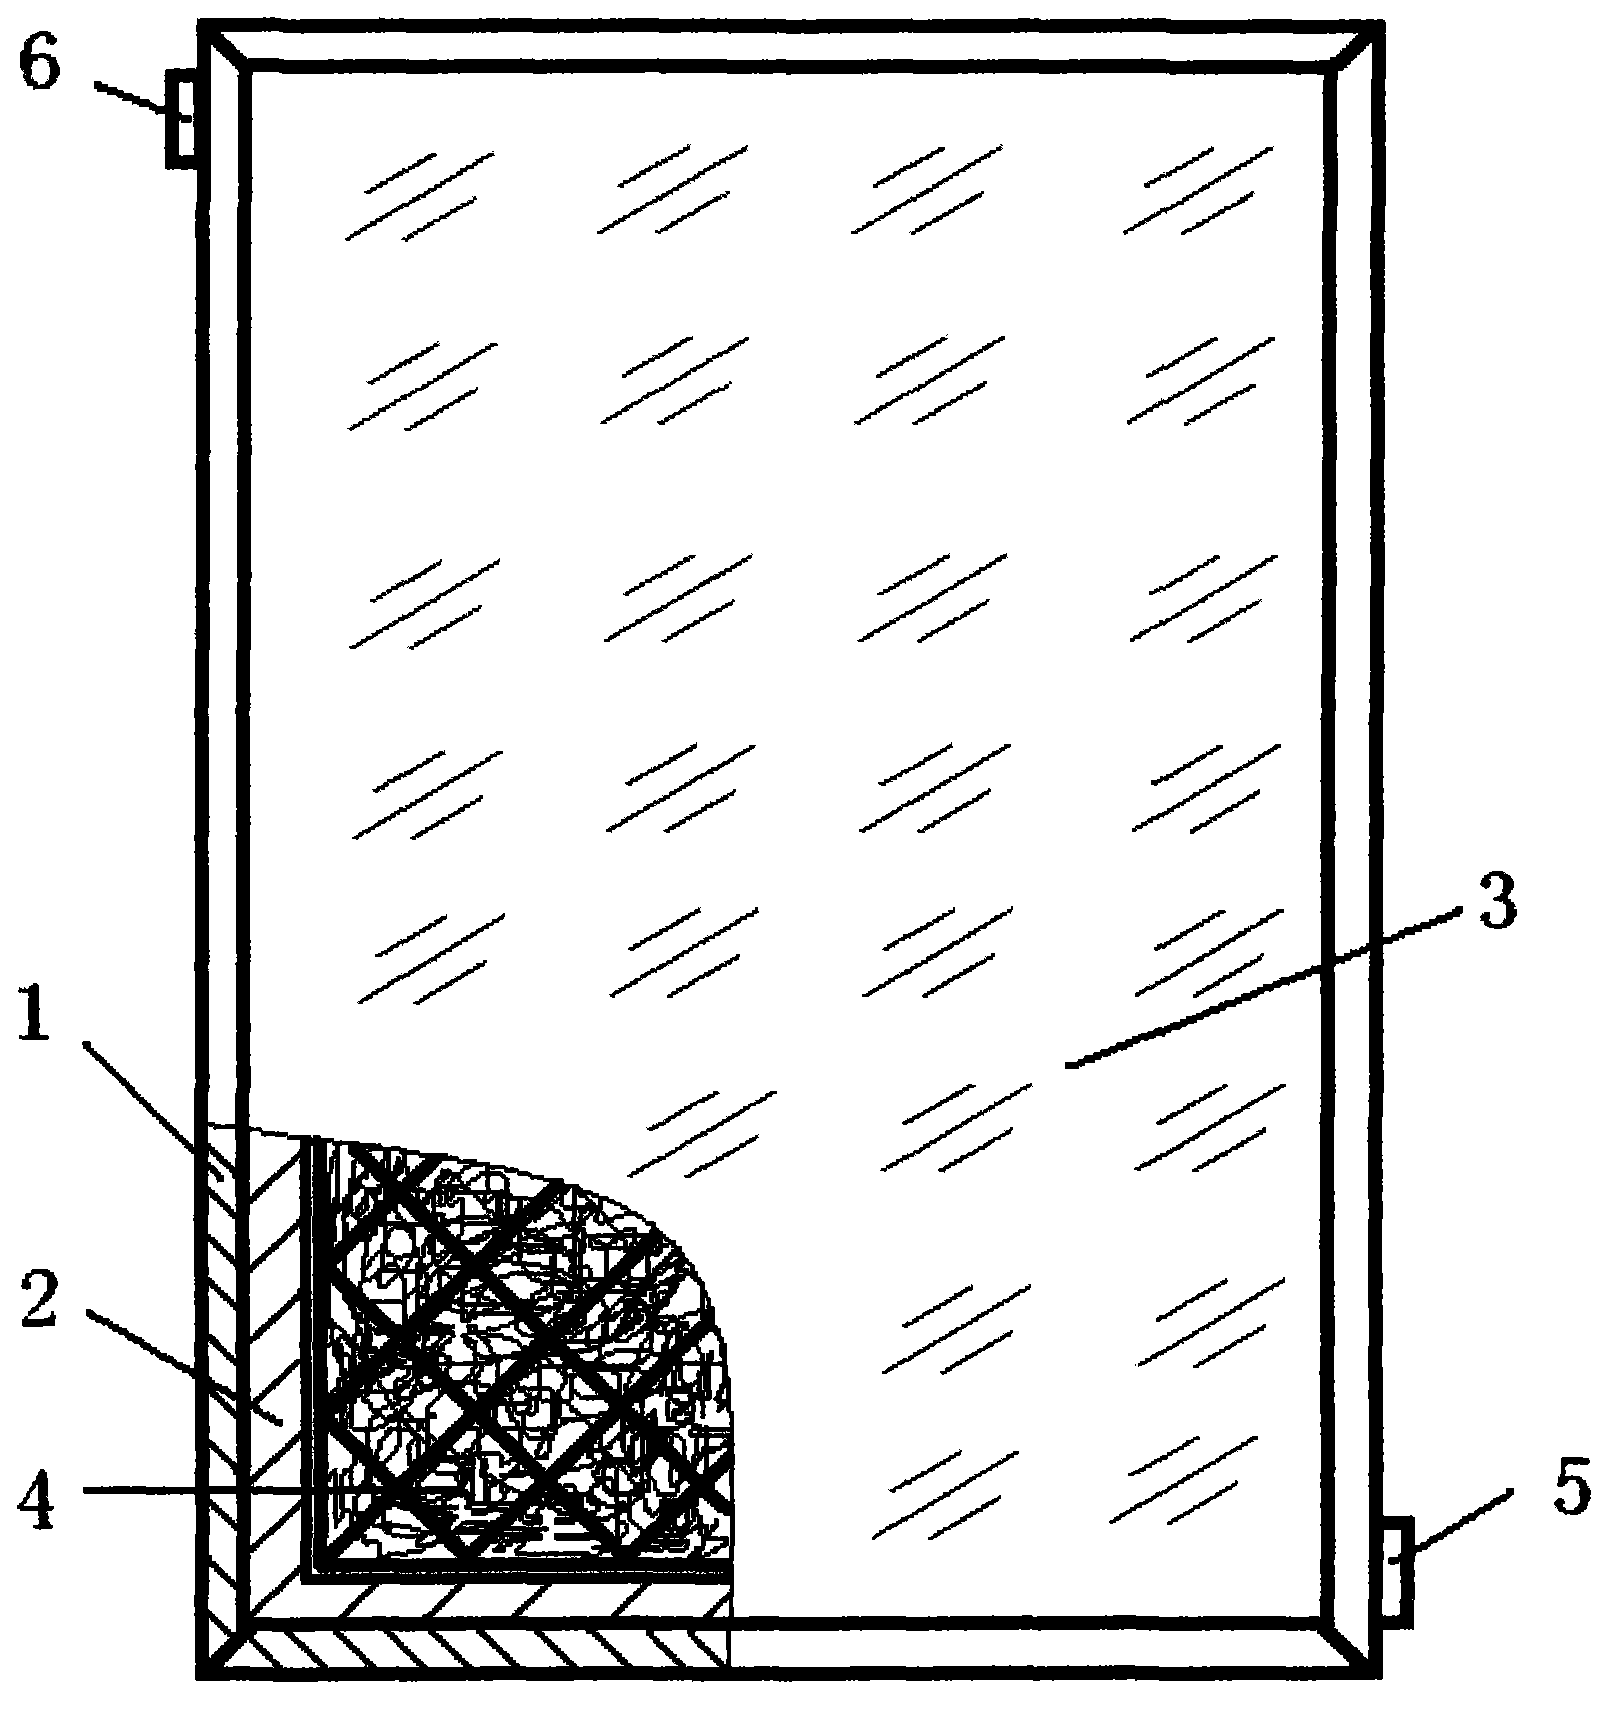 Novel solar heat collector with net wires